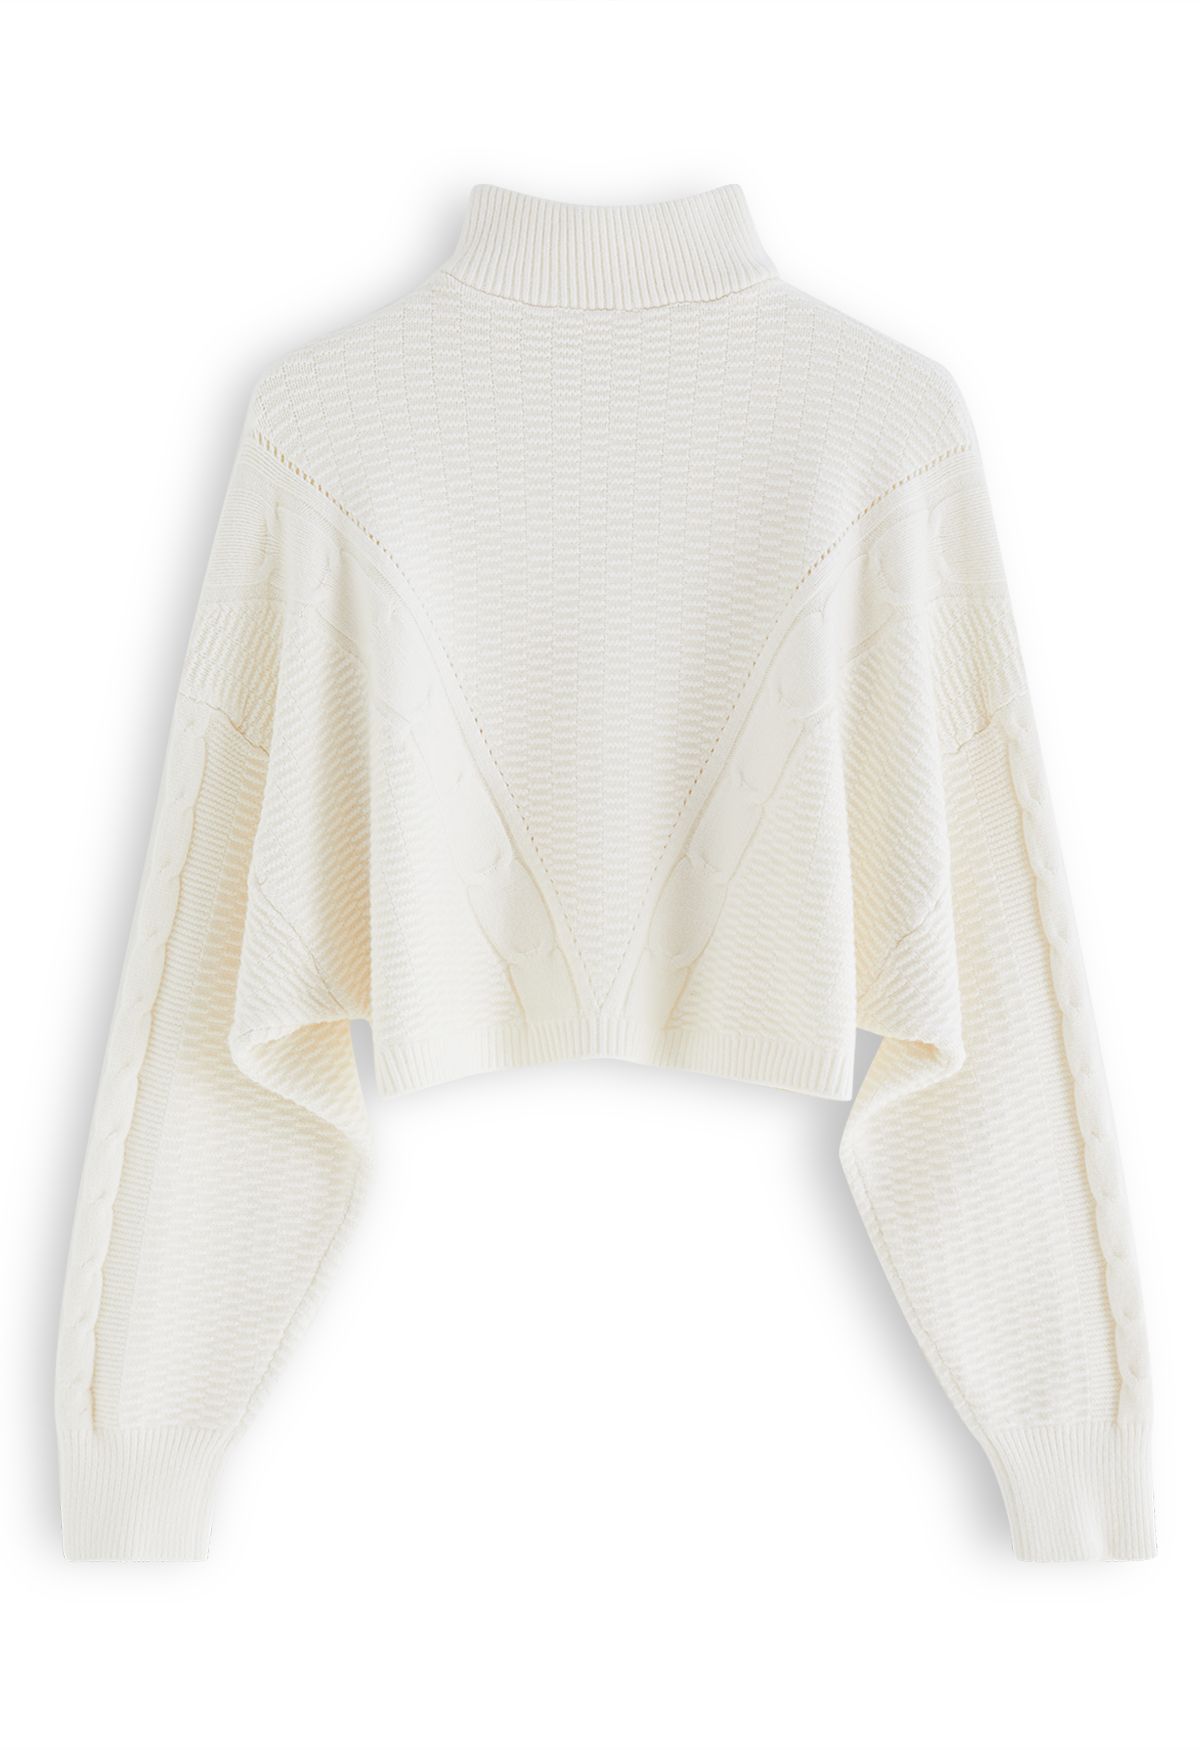 Zipper Neck Embossed Braided Knit Crop Top in Ivory